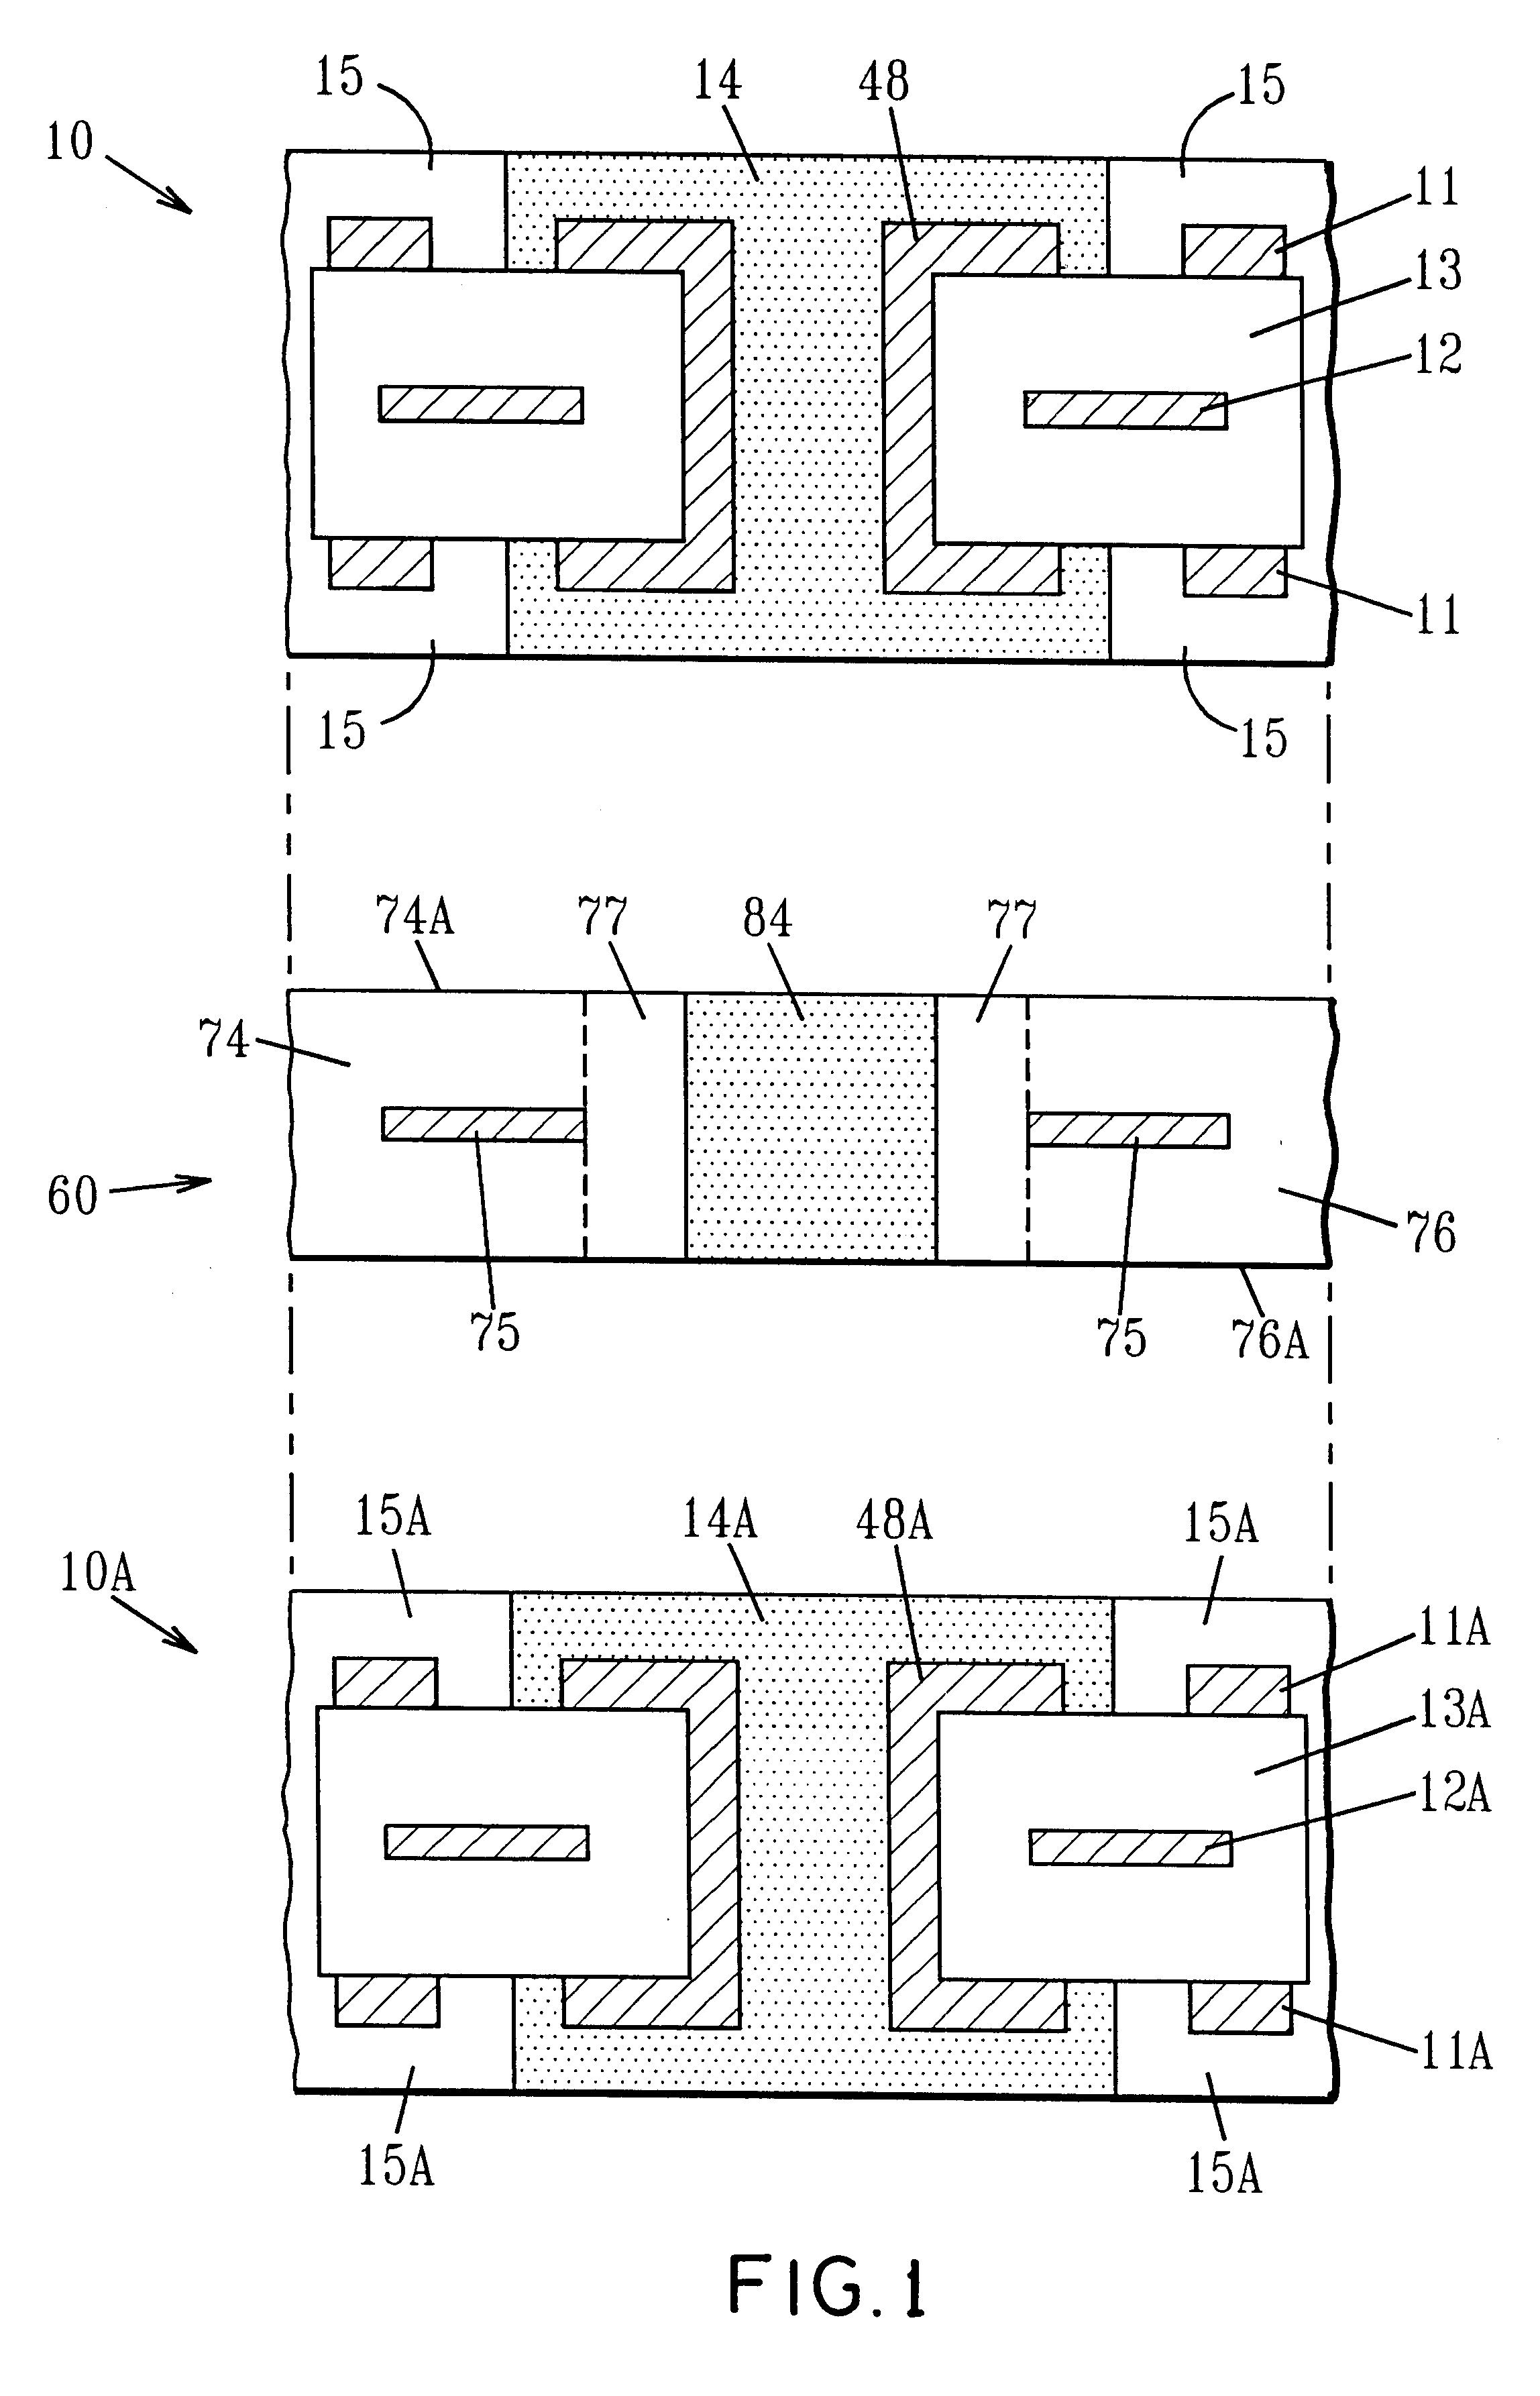 Composite laminate circuit structure and methods of interconnecting the same